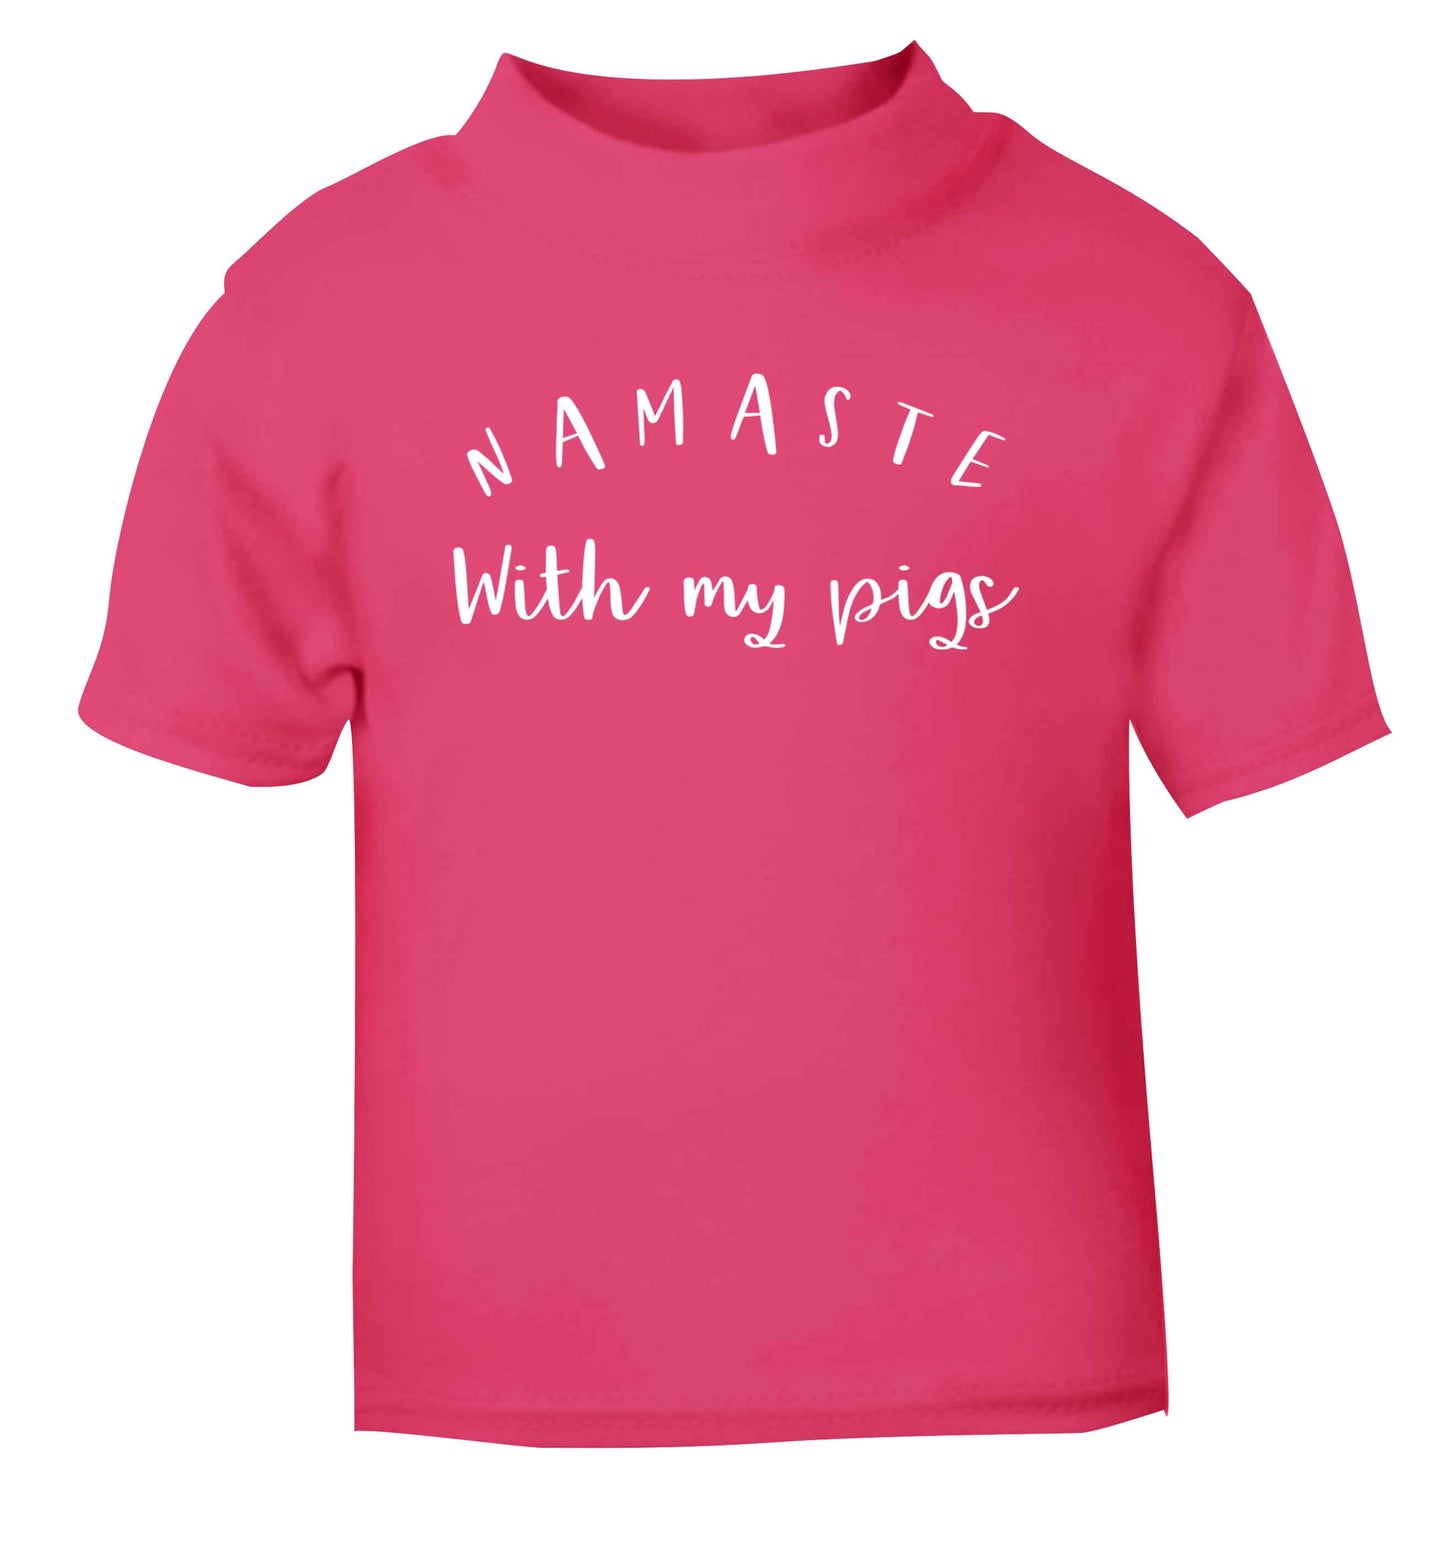 Namaste with my pigs pink Baby Toddler Tshirt 2 Years